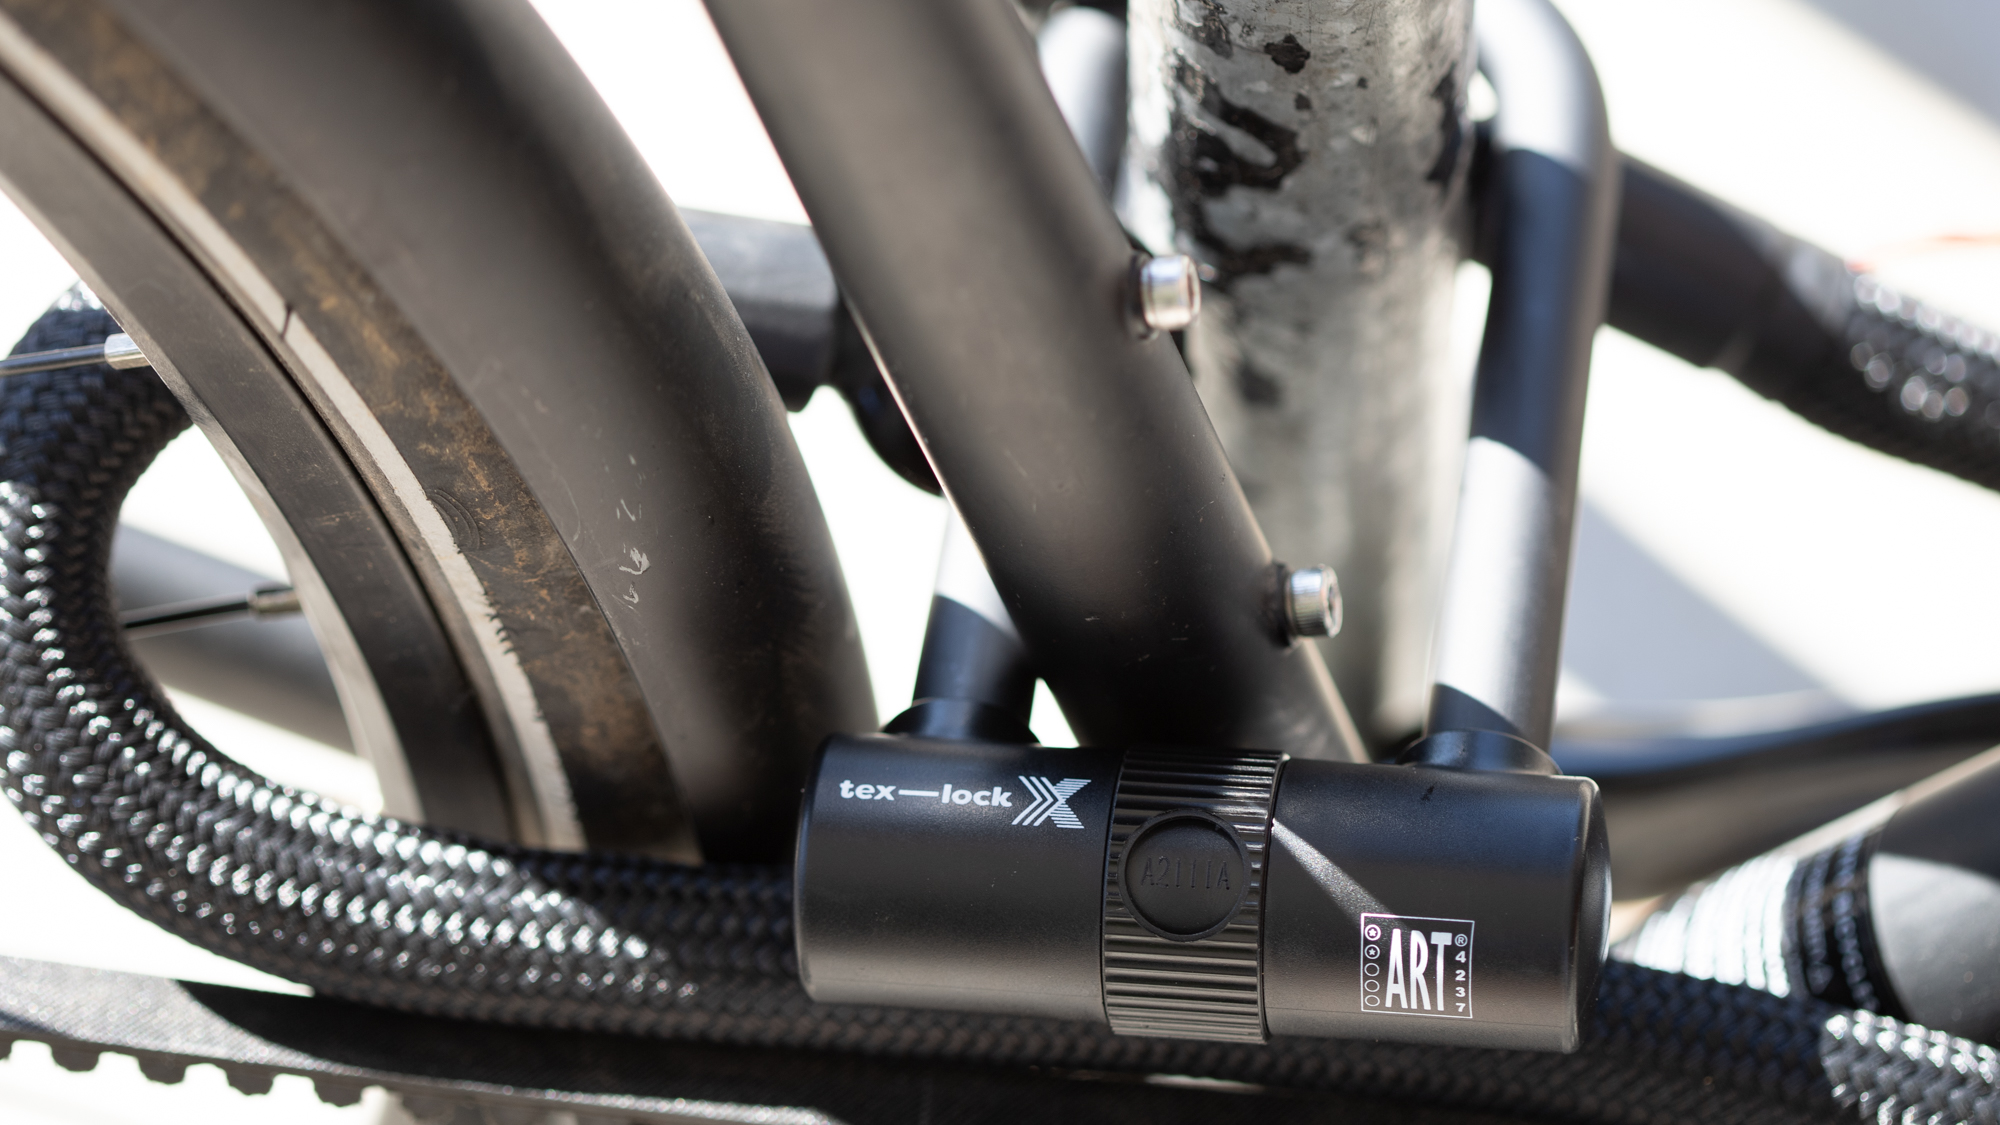 Tex-Lock bike lock review: Have you considered a rope as a bike lock?